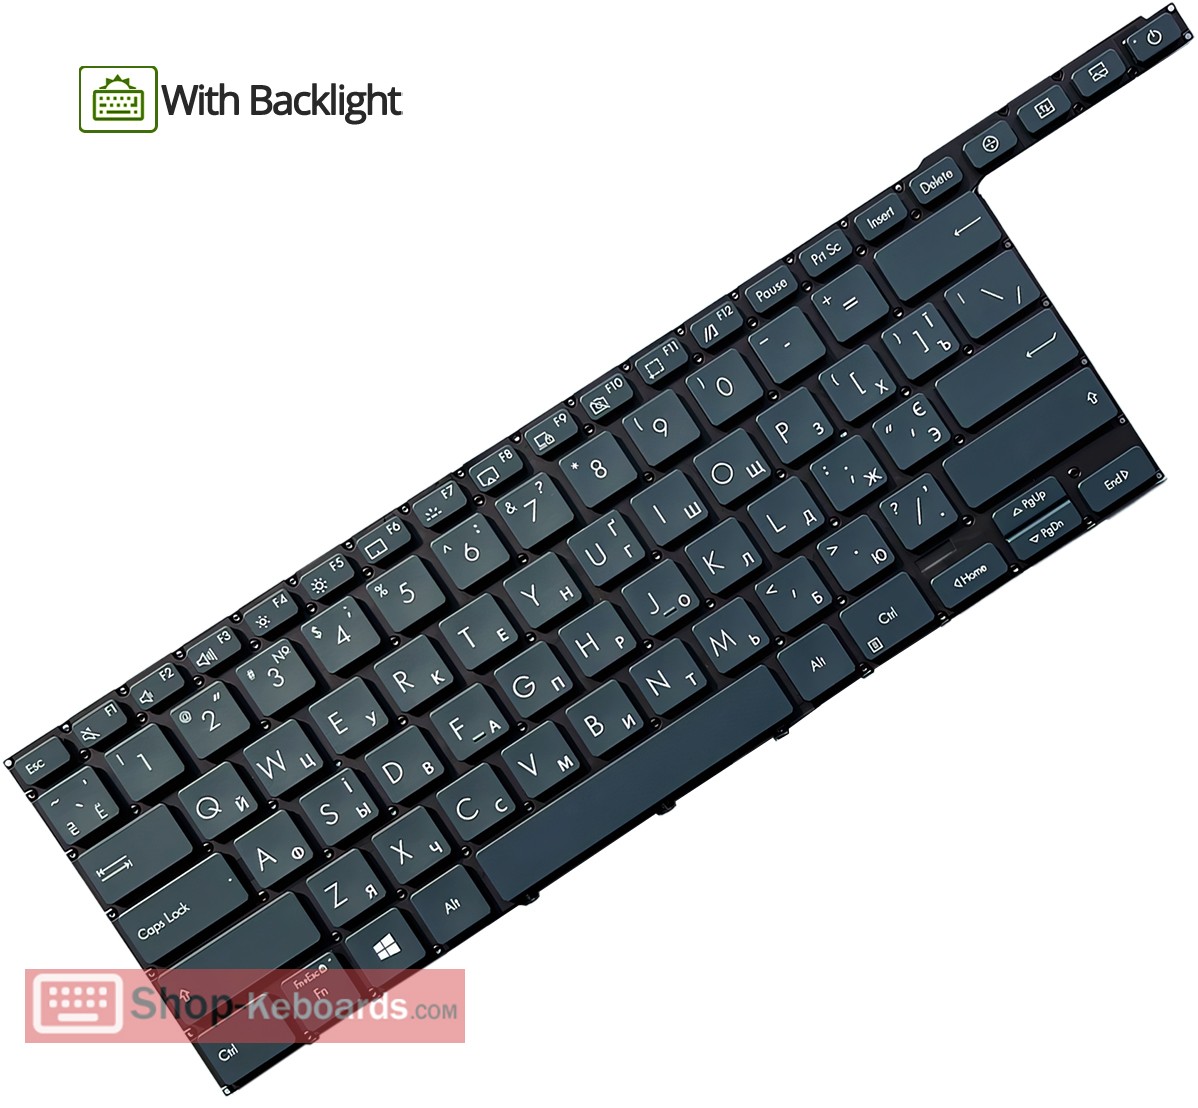 Asus 0KNB0-6823AR00  Keyboard replacement